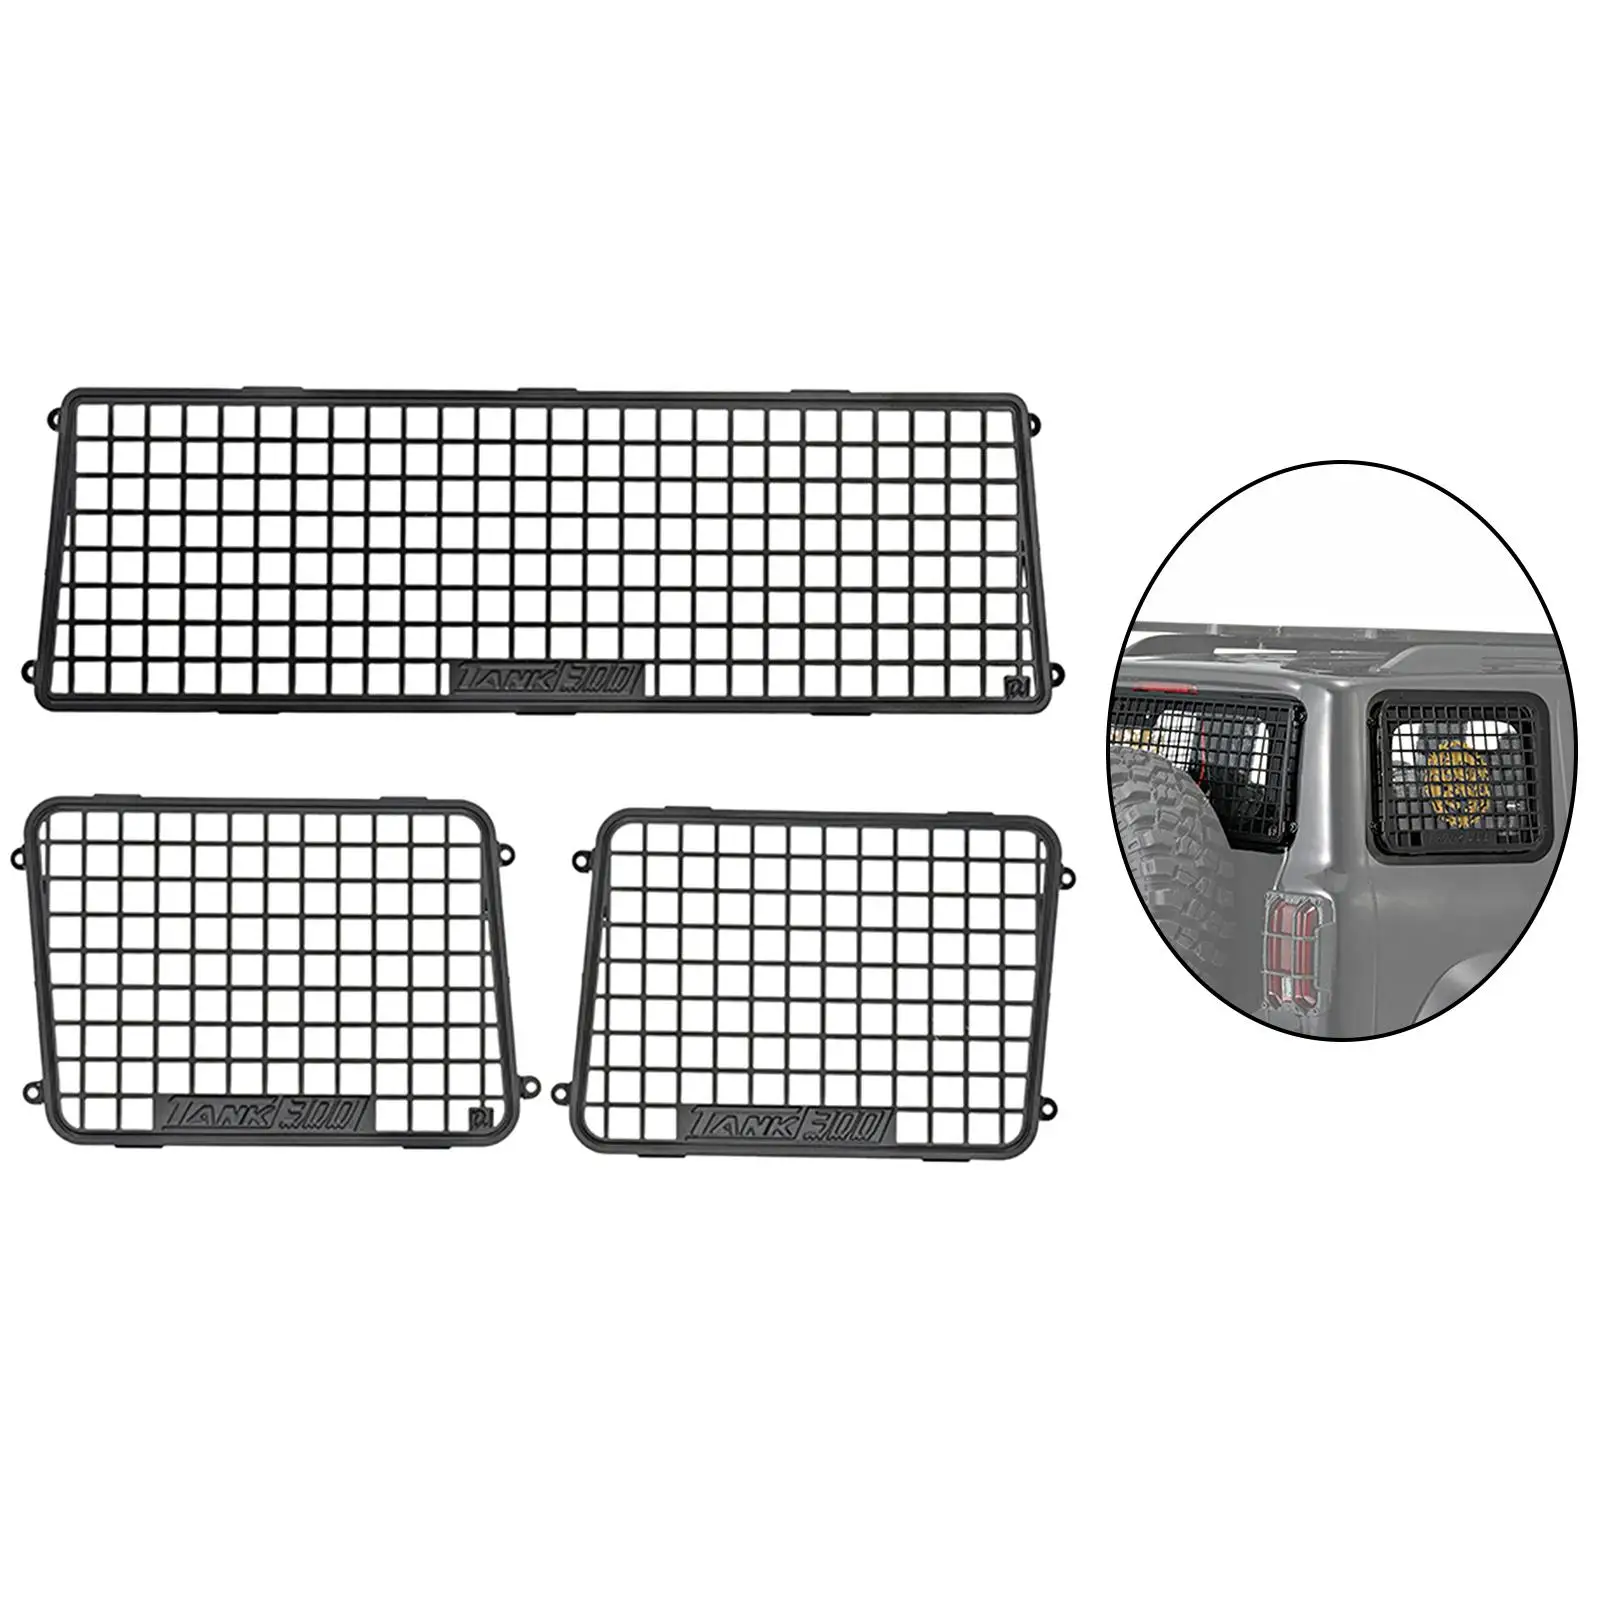 RC Car Upgrade Parts, Window Net Replace Decoration Accessaries for THOR Tank 300